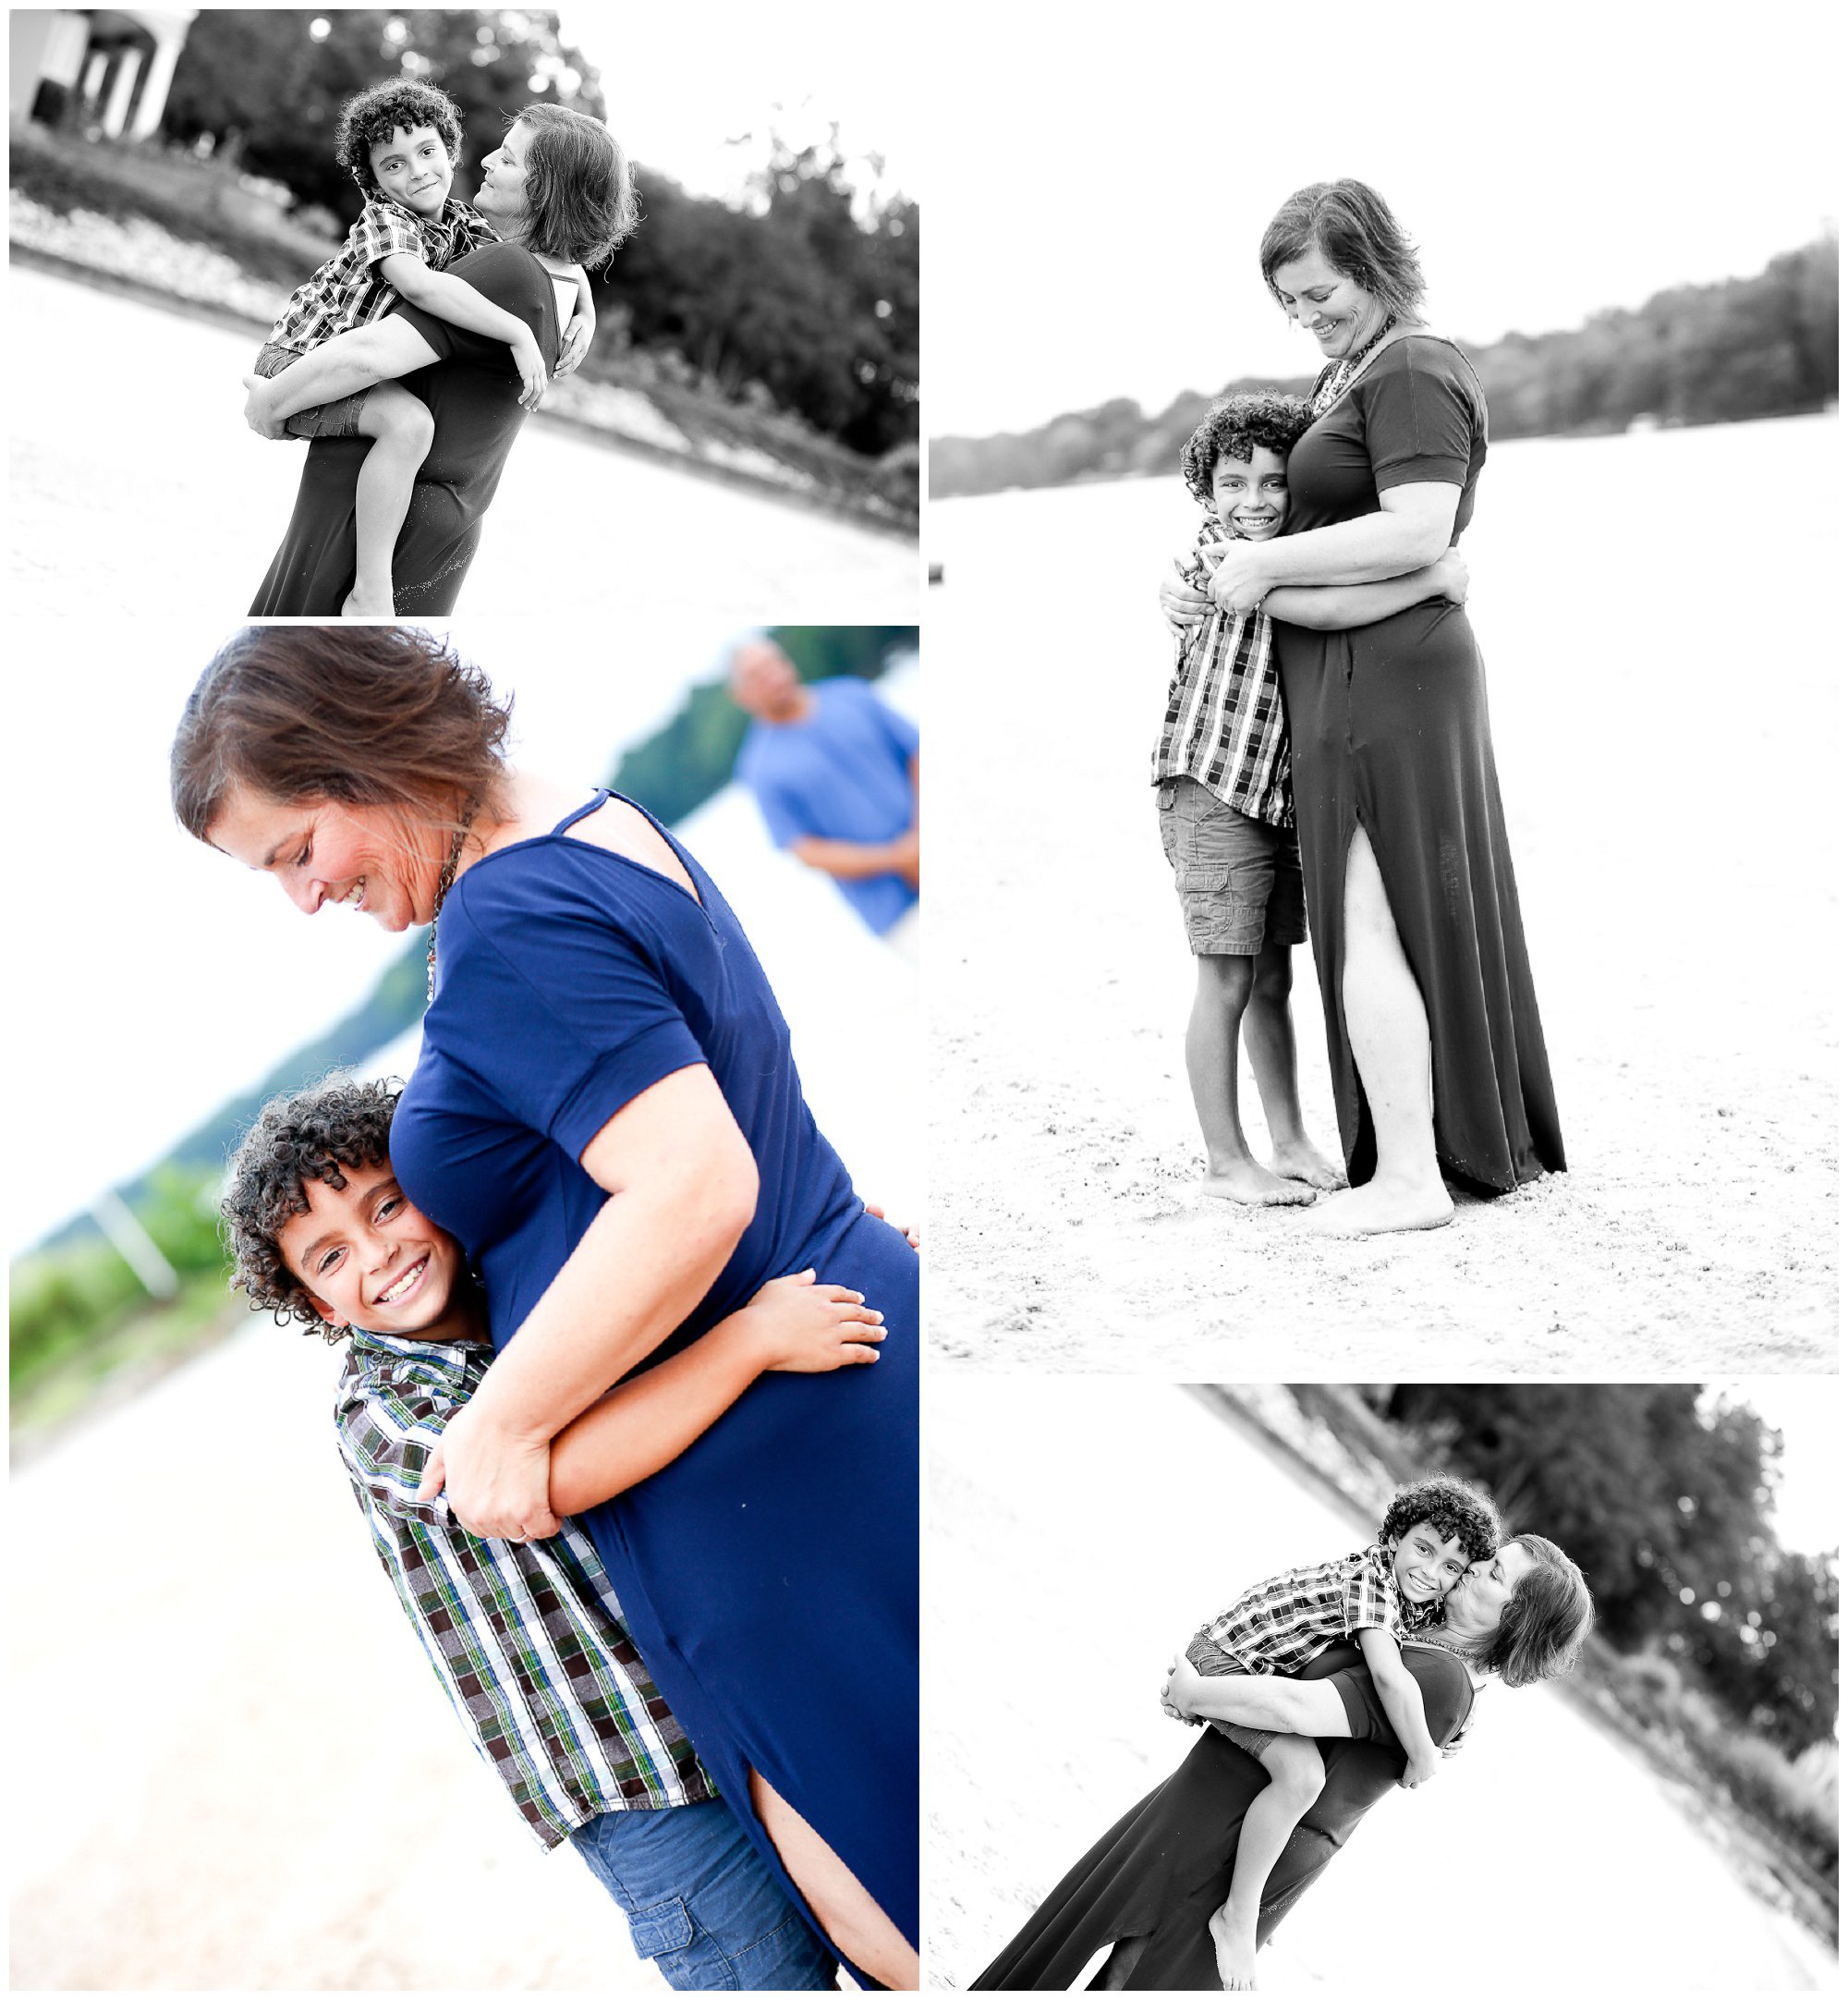 Fluvanna Family Summer Portraits at Lake Monticello Beach Photographer charlottesville photographer pictures siblings sand fun cville